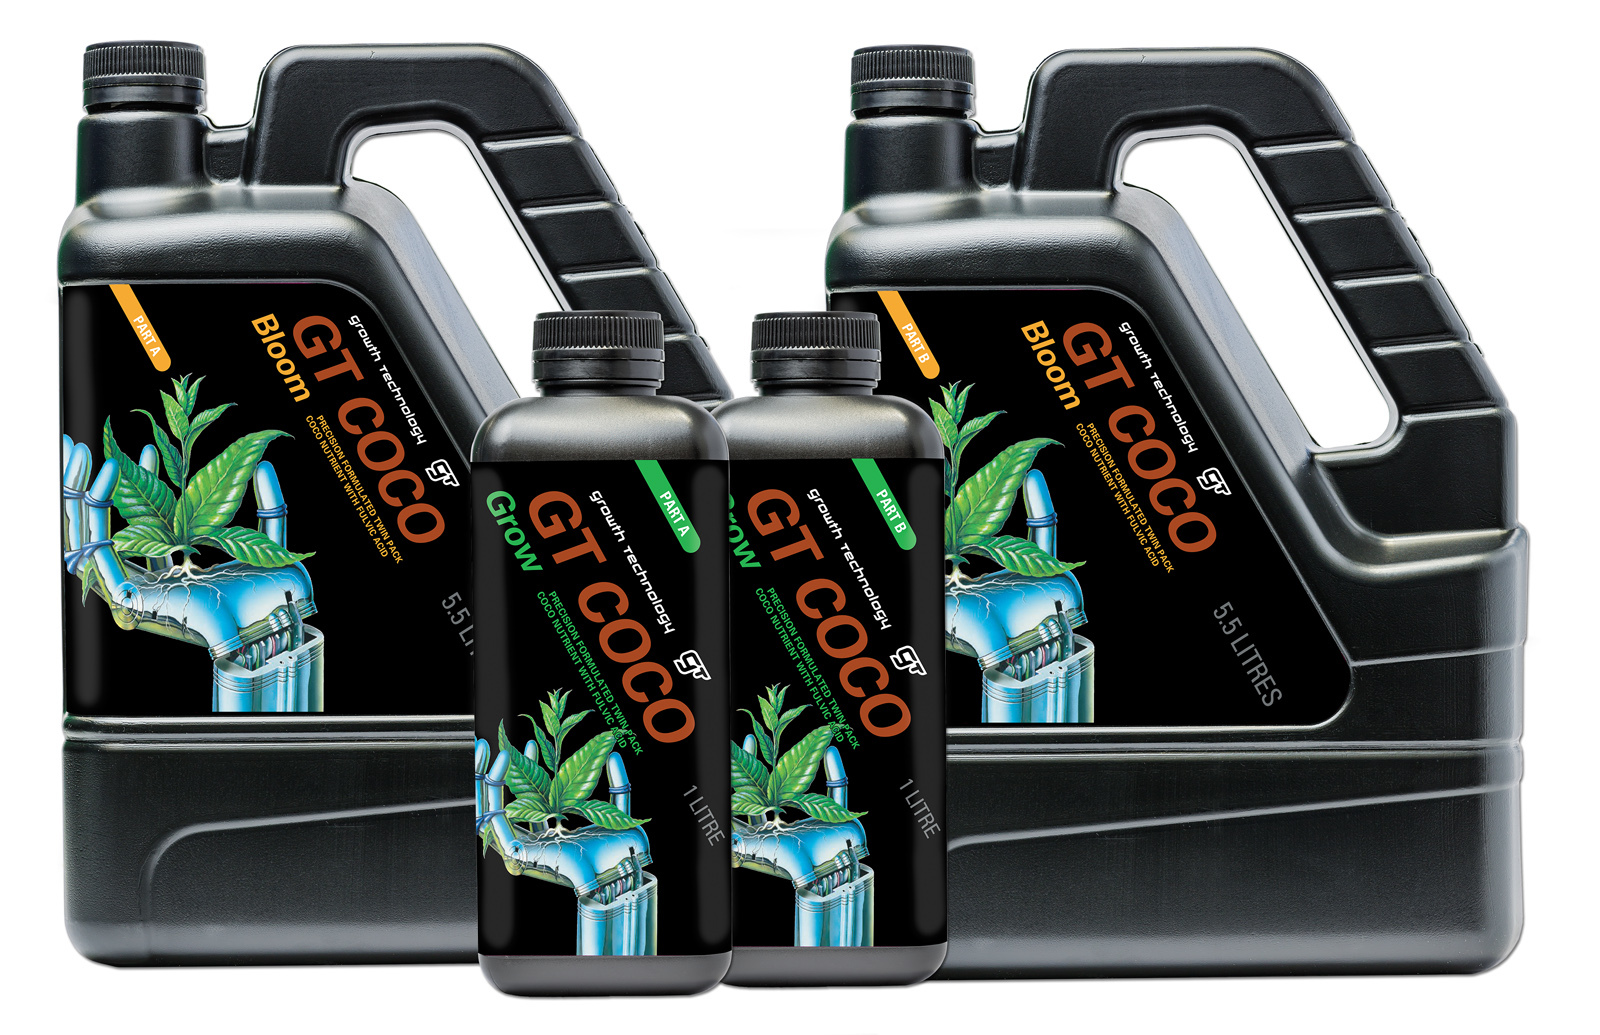 GT Coco Grow 5+5Ltr = 10L set - Growth technology makers of Optimum Grow